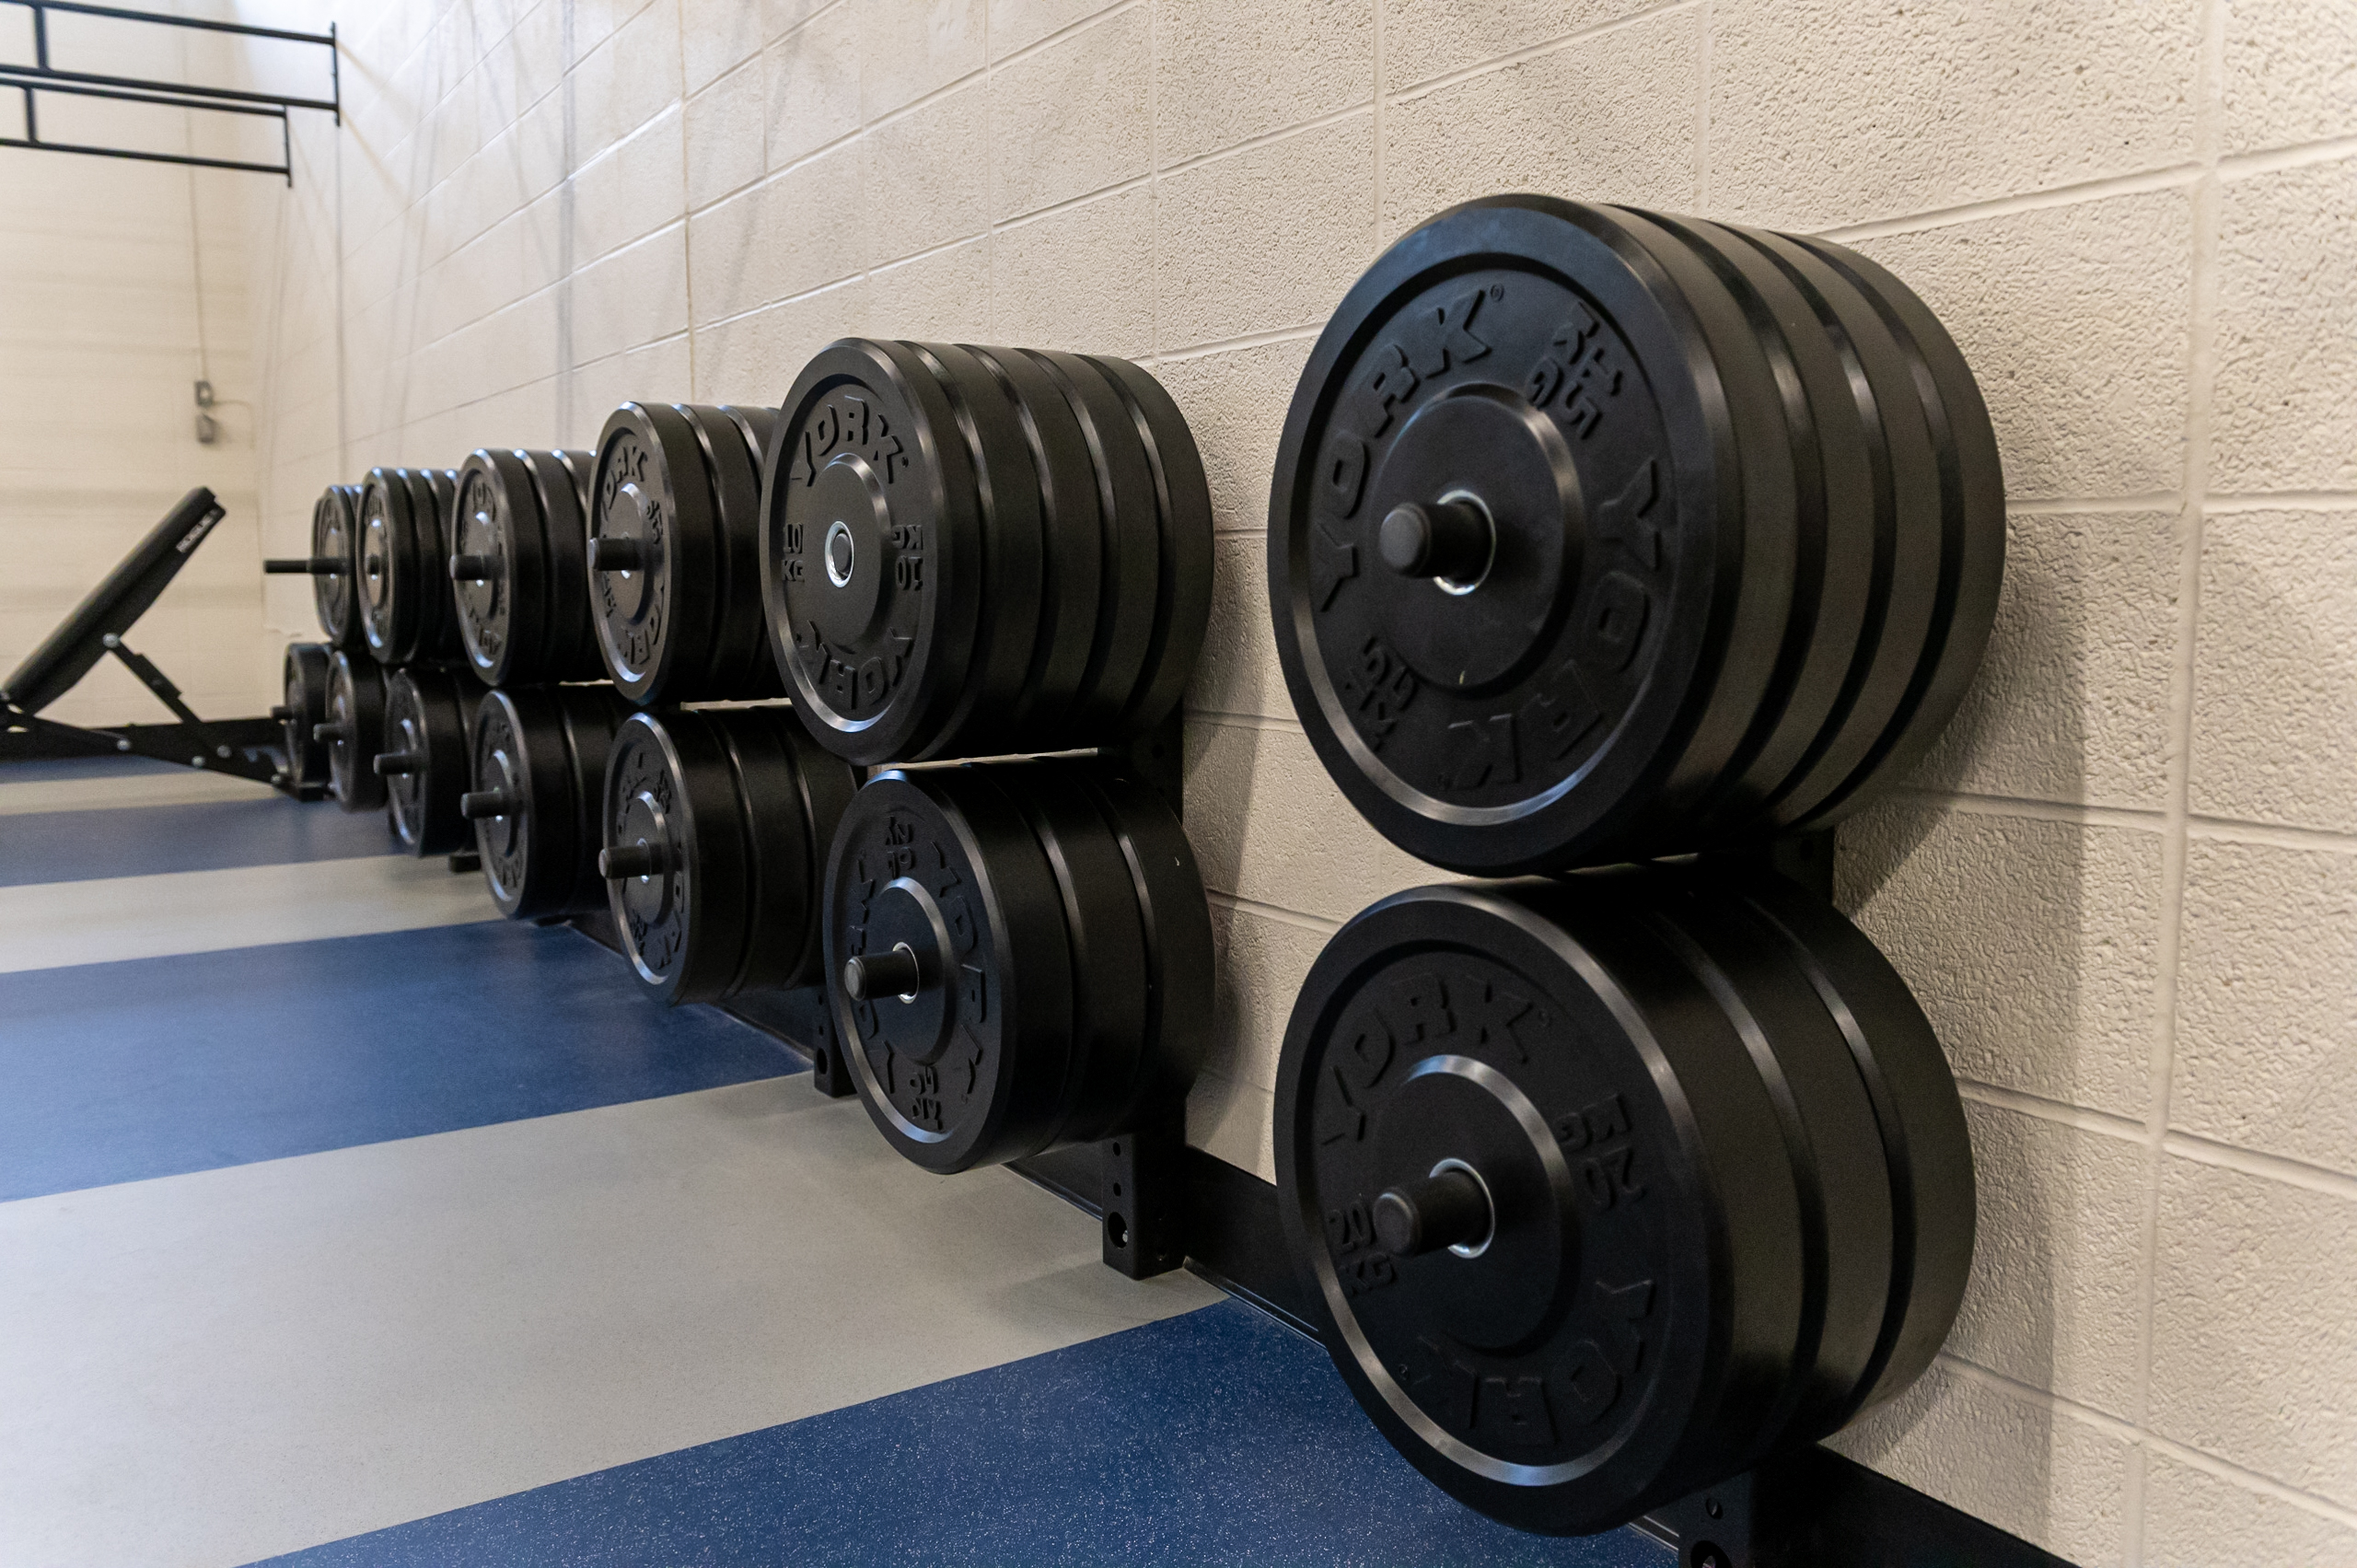 weight plates hanging on wall pegs in weightlifting zone room